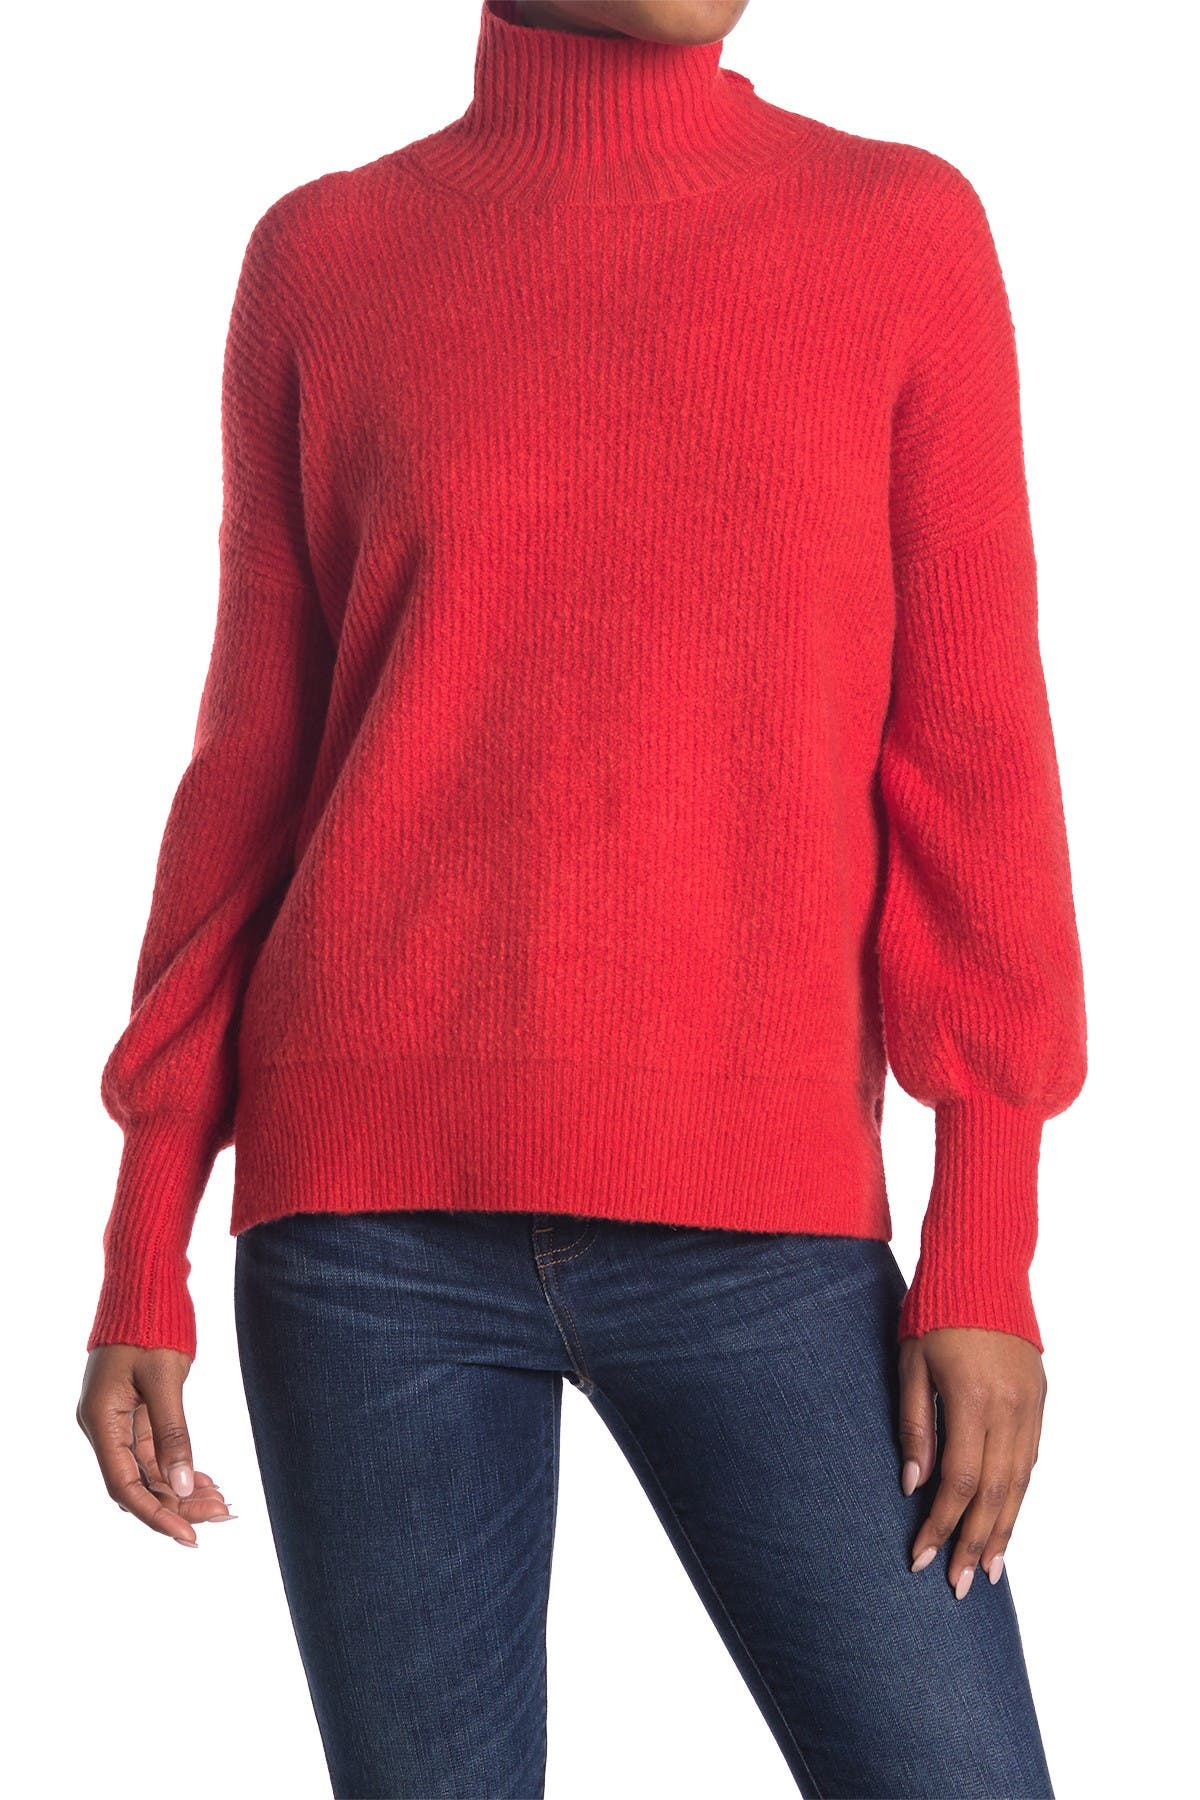 Women's French Connection Sweaters ...